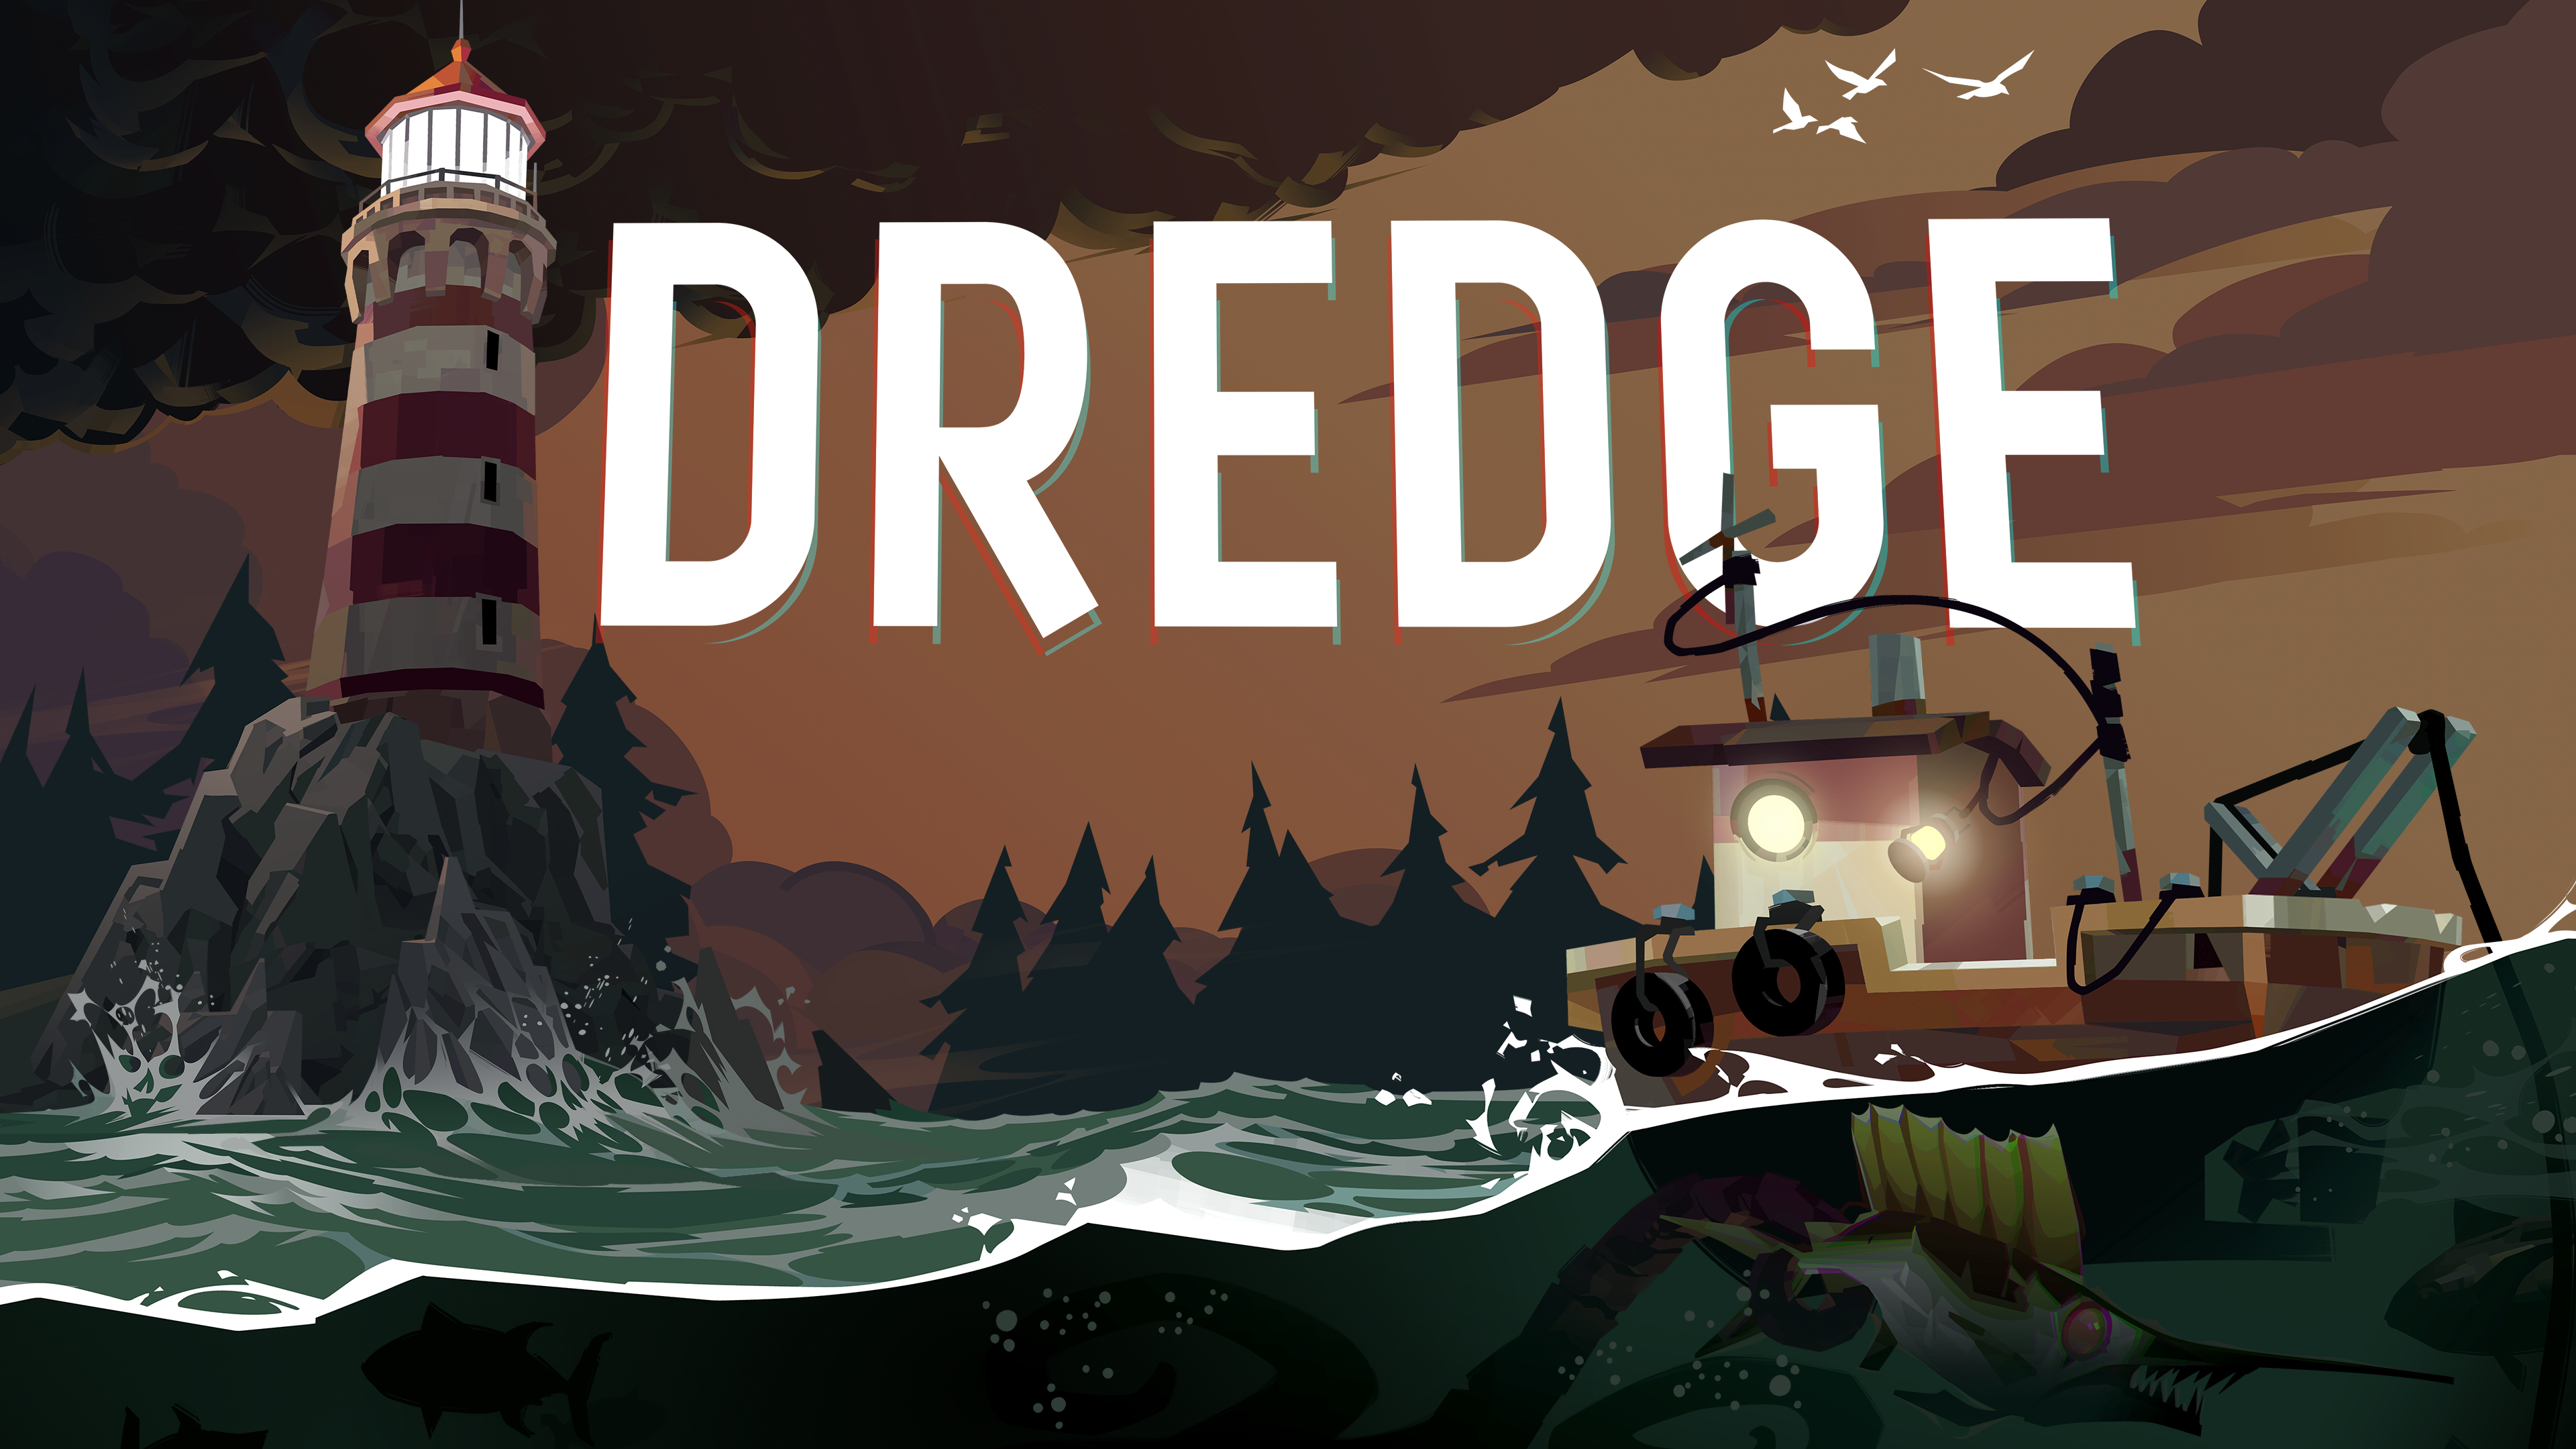 You can now try fishing game Dredge before you buy with this new Switch demo - Eurogamer.net (Picture 2)